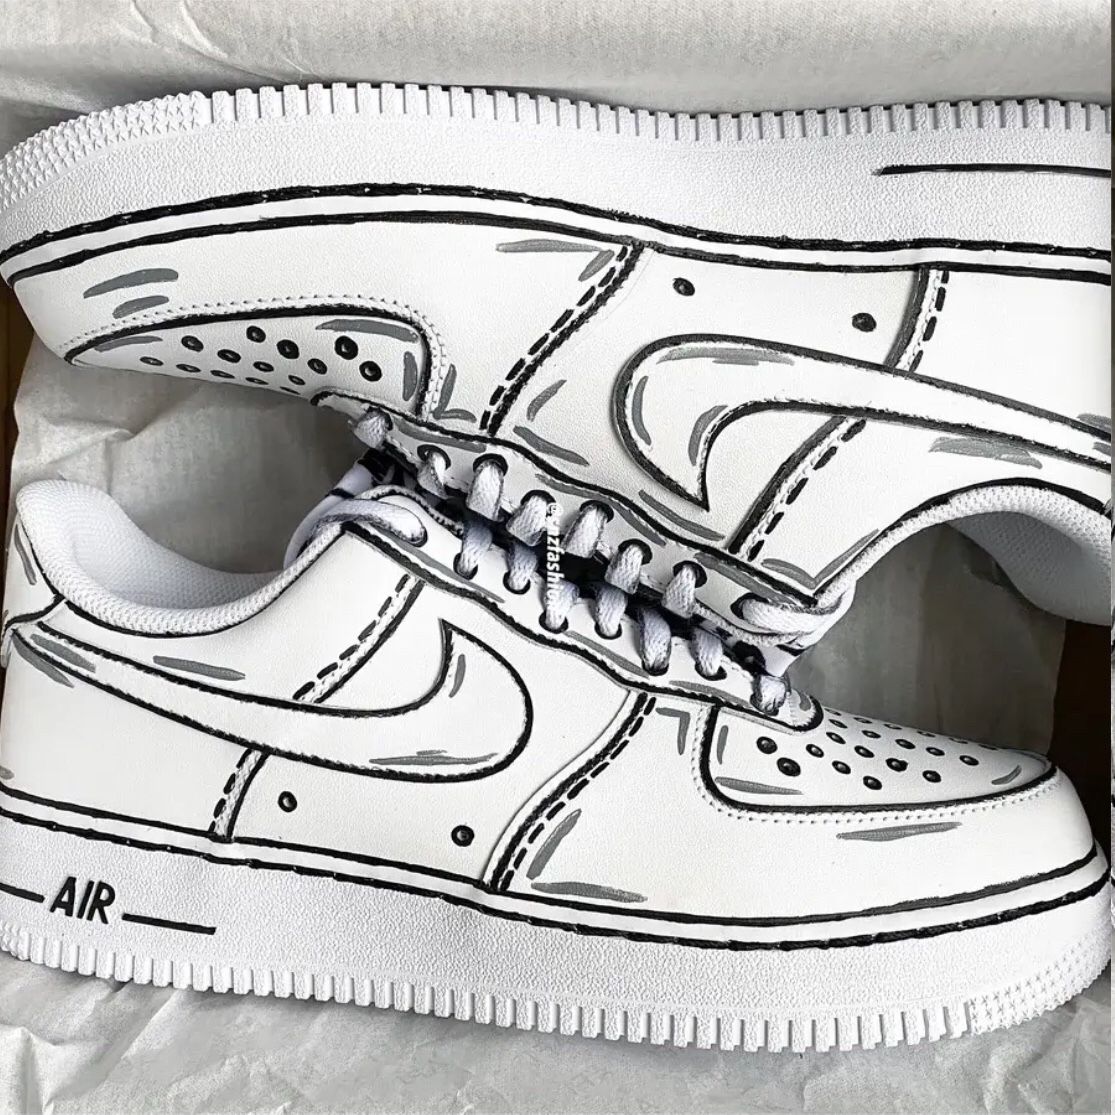 Despite costing $40 more, the “Utopia” Air Force 1s come with a regular Nike  AF1 box and style code. 🥴 [📸 Illusionftd/tw, h/t @ovrnundr.io]